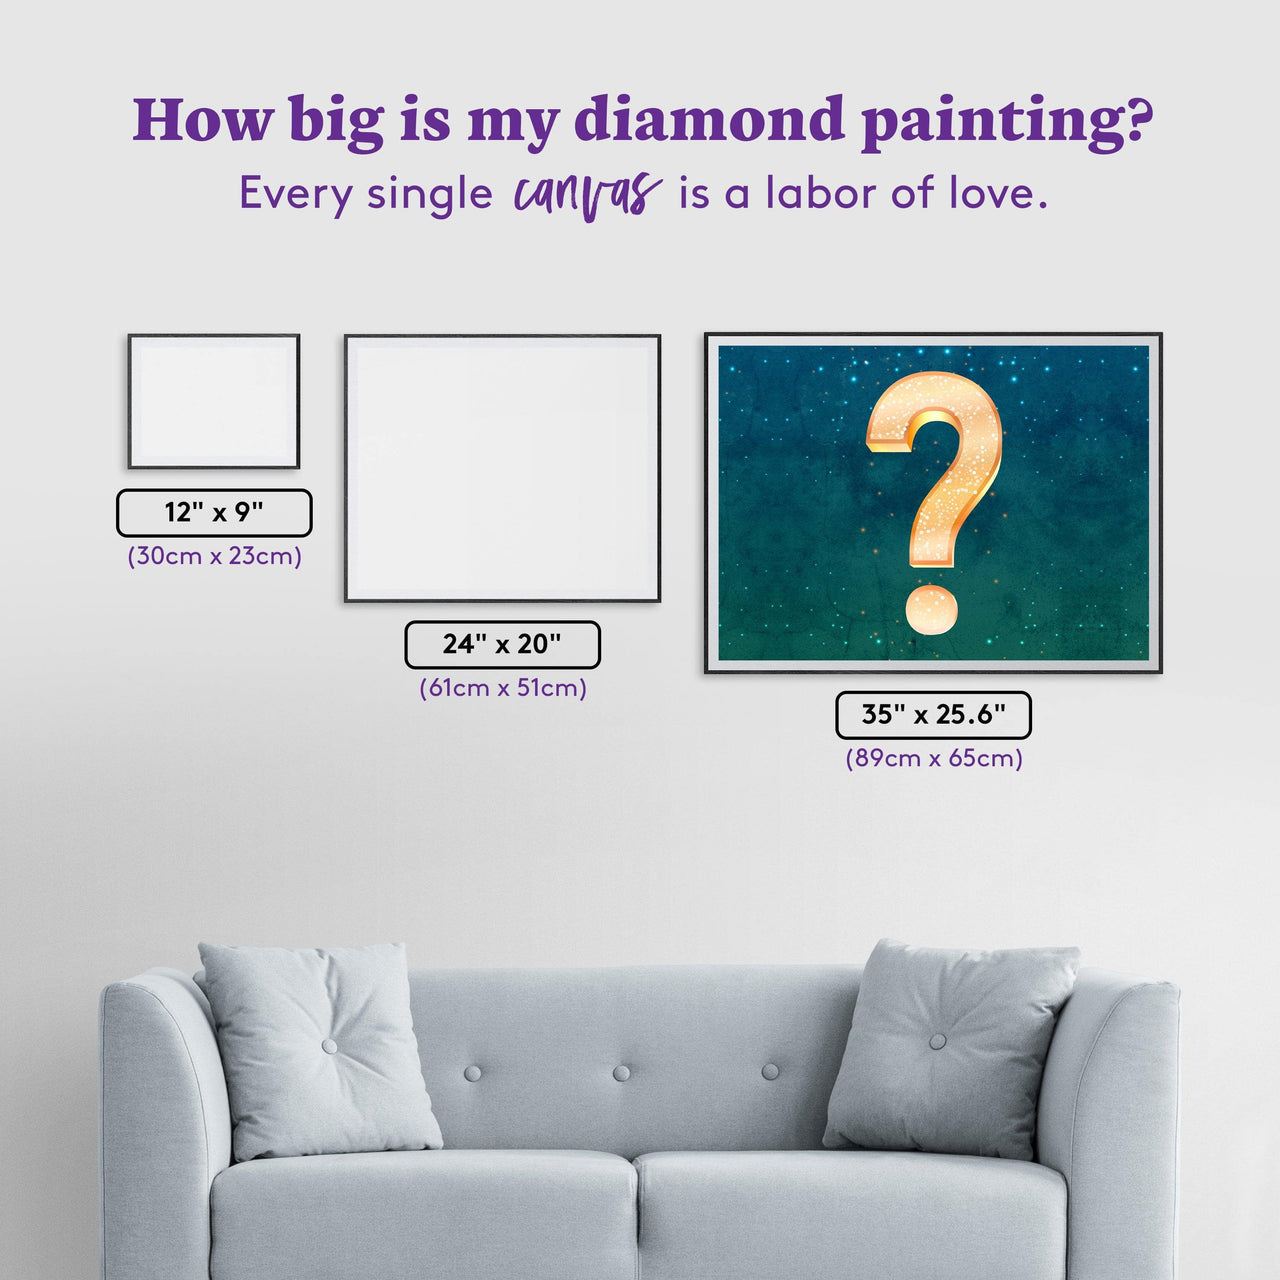 Diamond Painting Mystery Kit - Fantasy 35" x 25.6" (89cm x 65cm) / Square with 50 Colors including 4 ABs / 93,177